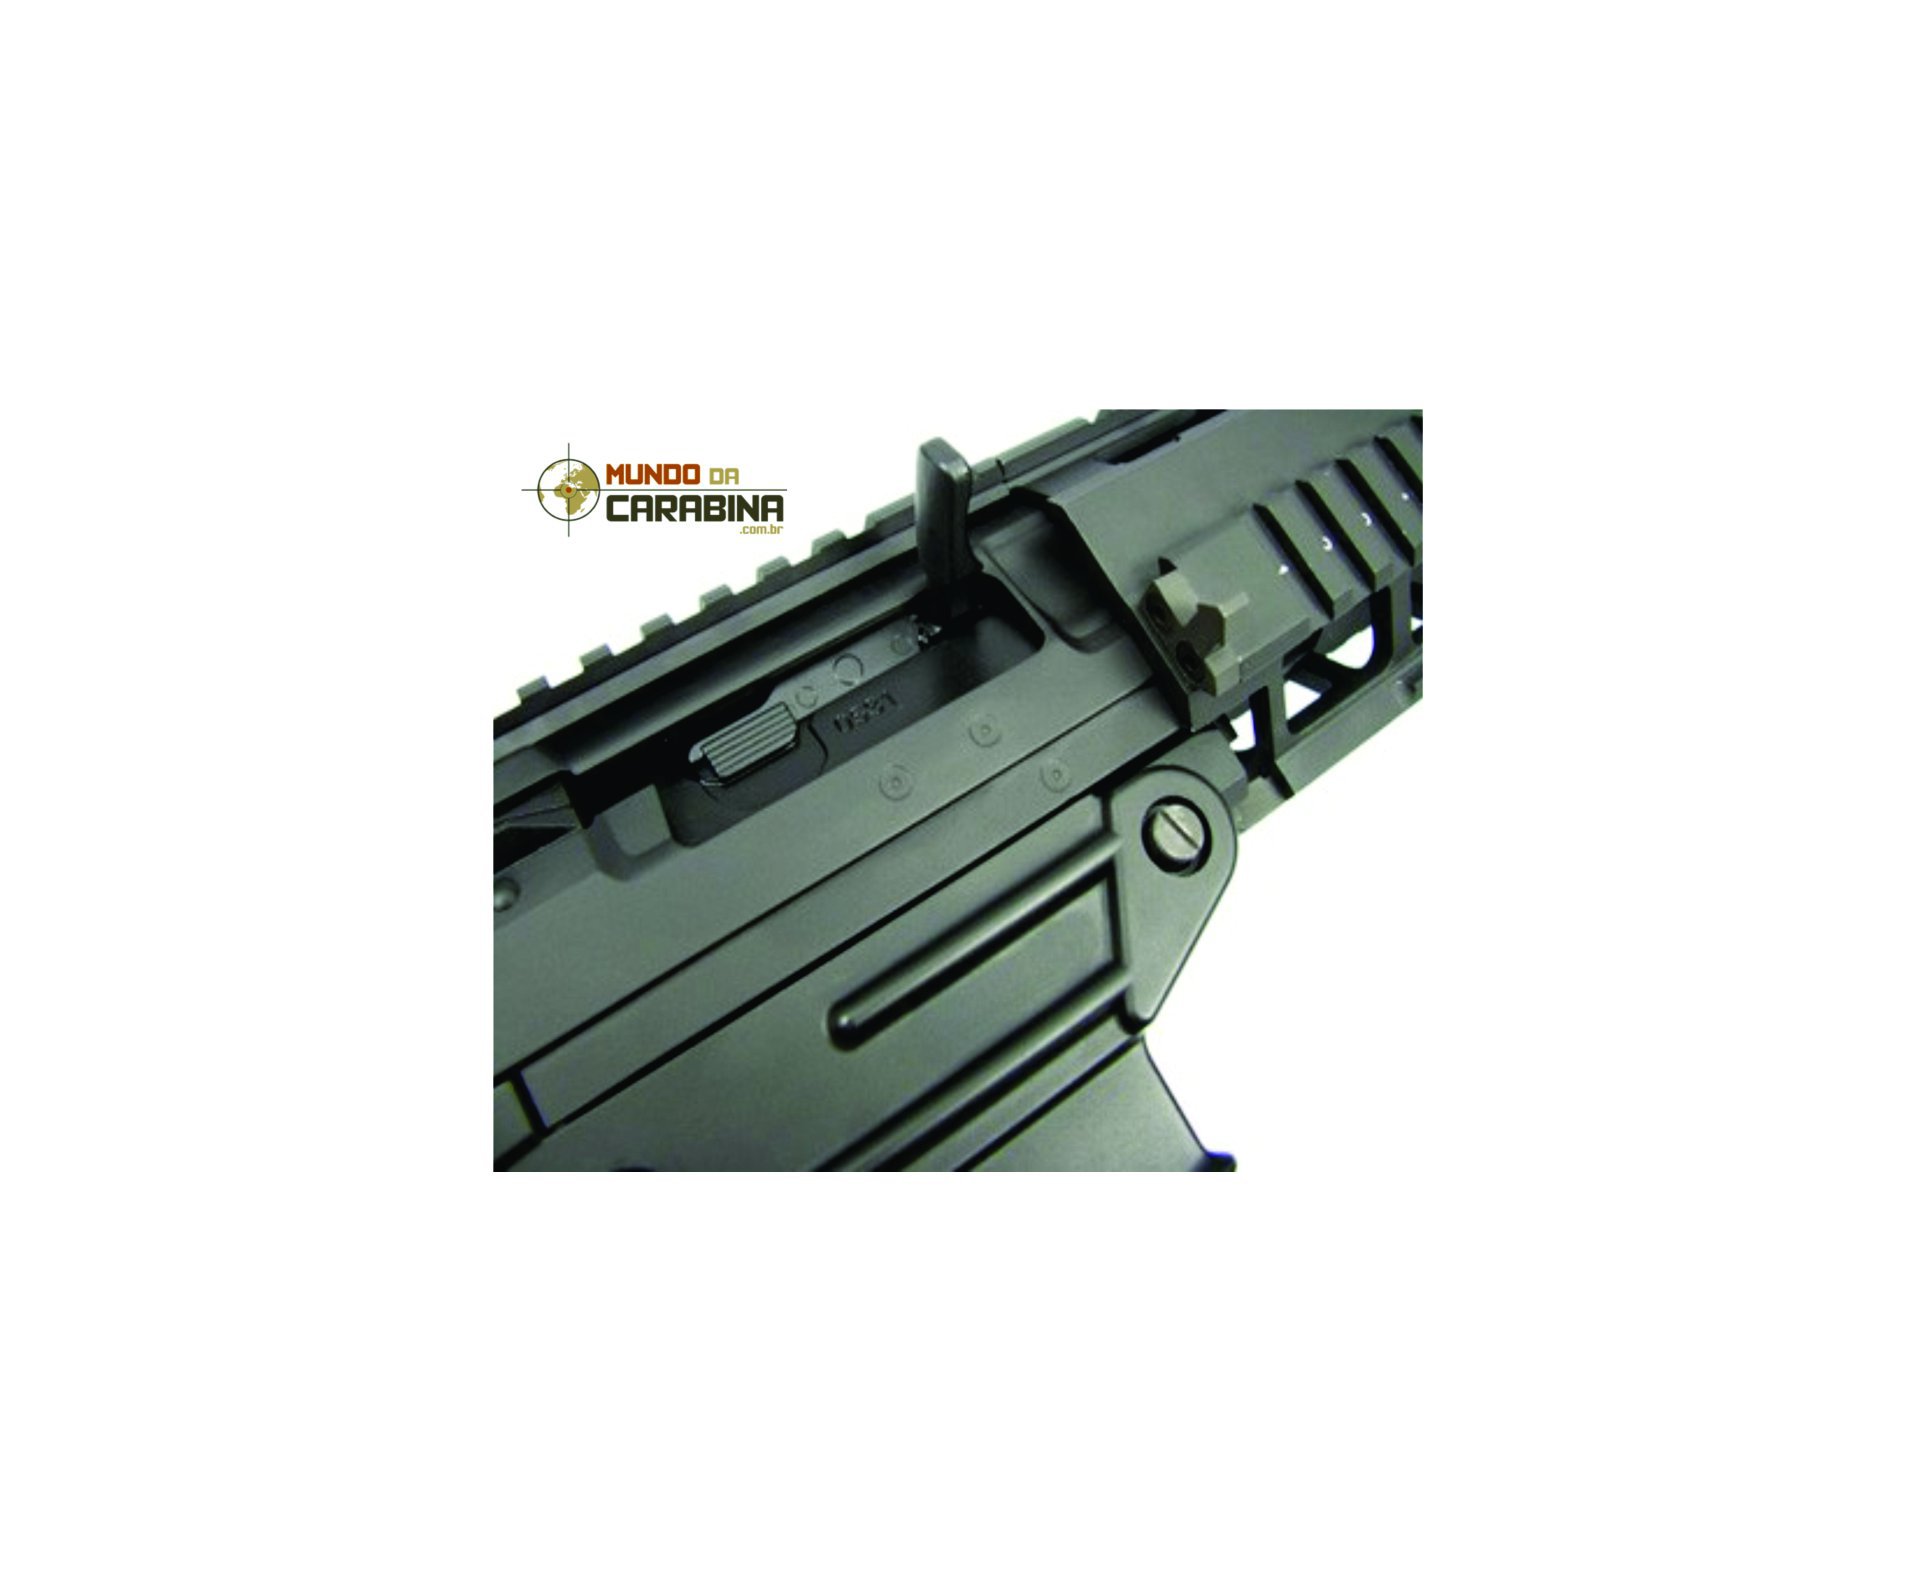 Rifle De Airsoft Sig 556 Shorty Full Metal Blowback Cal 6.0mm - King Arms